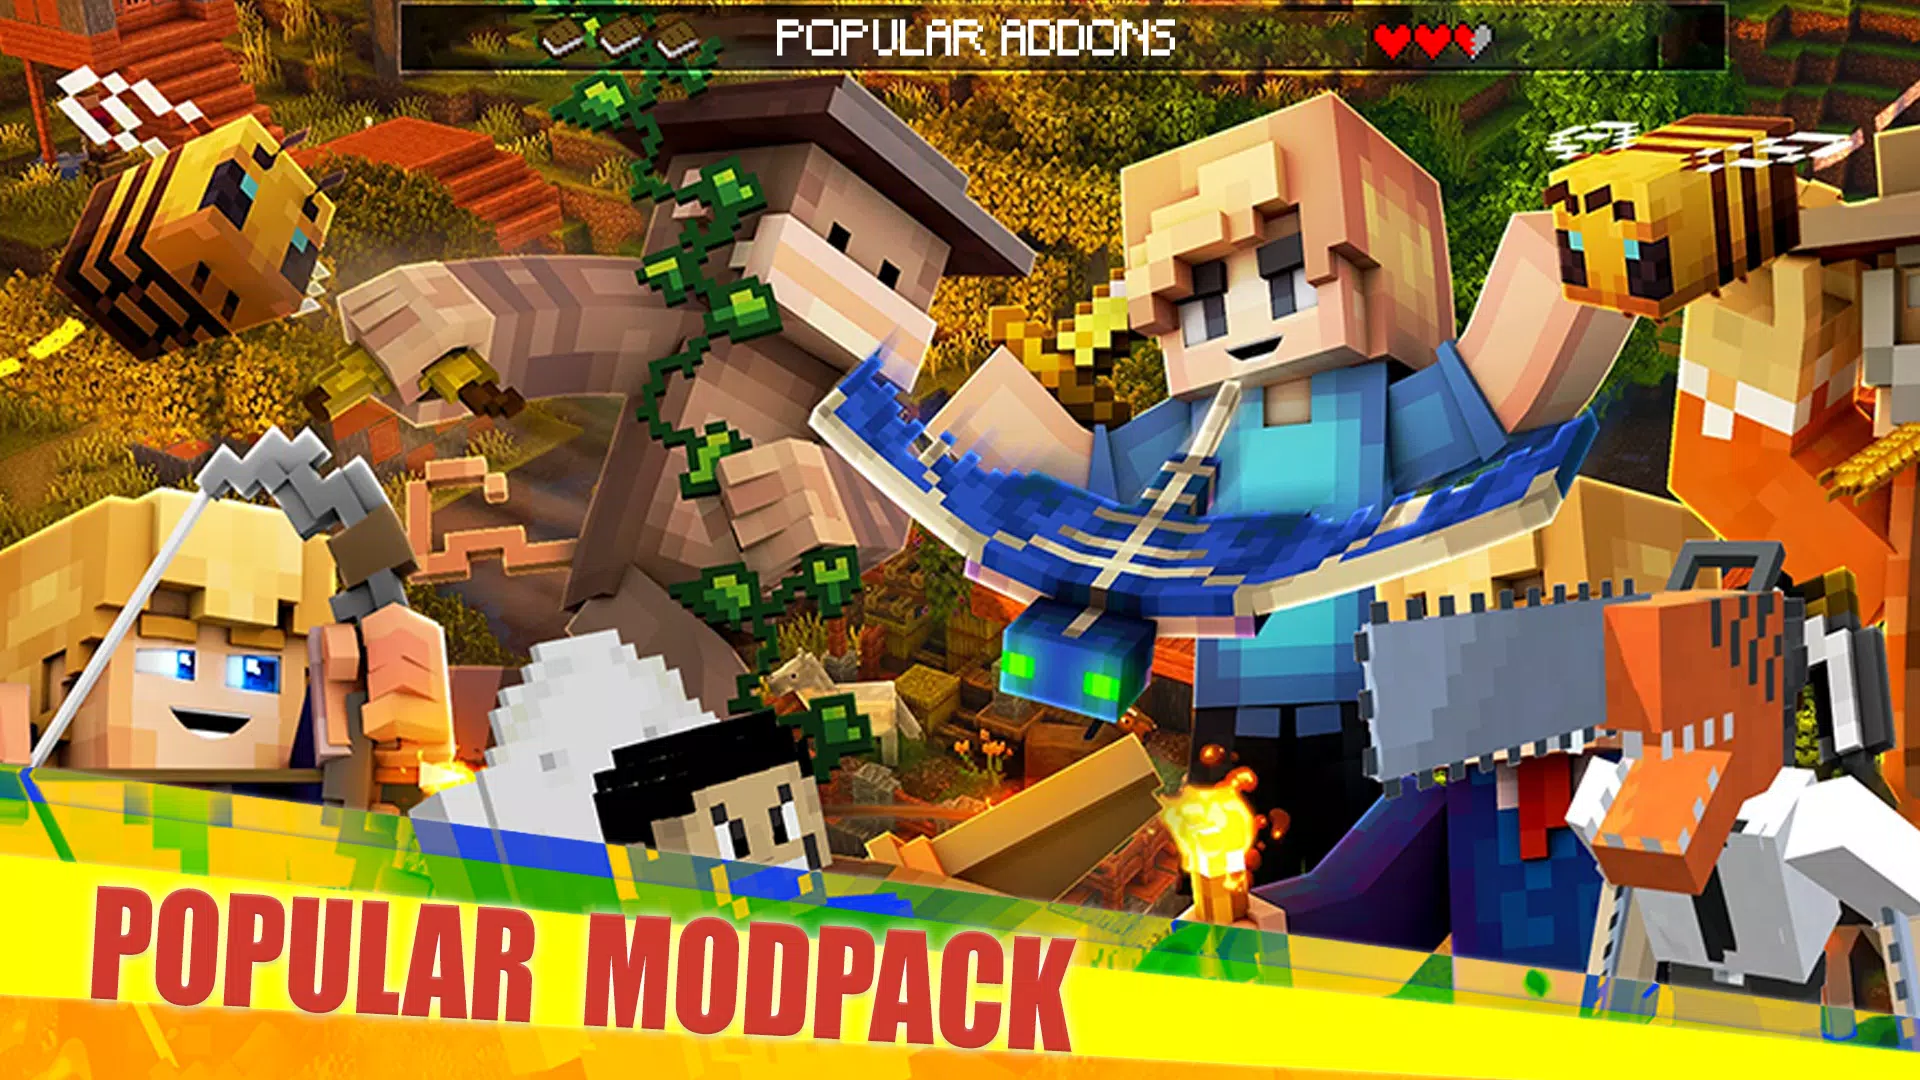 Mods for Minecraft PE for Android - Free App Download